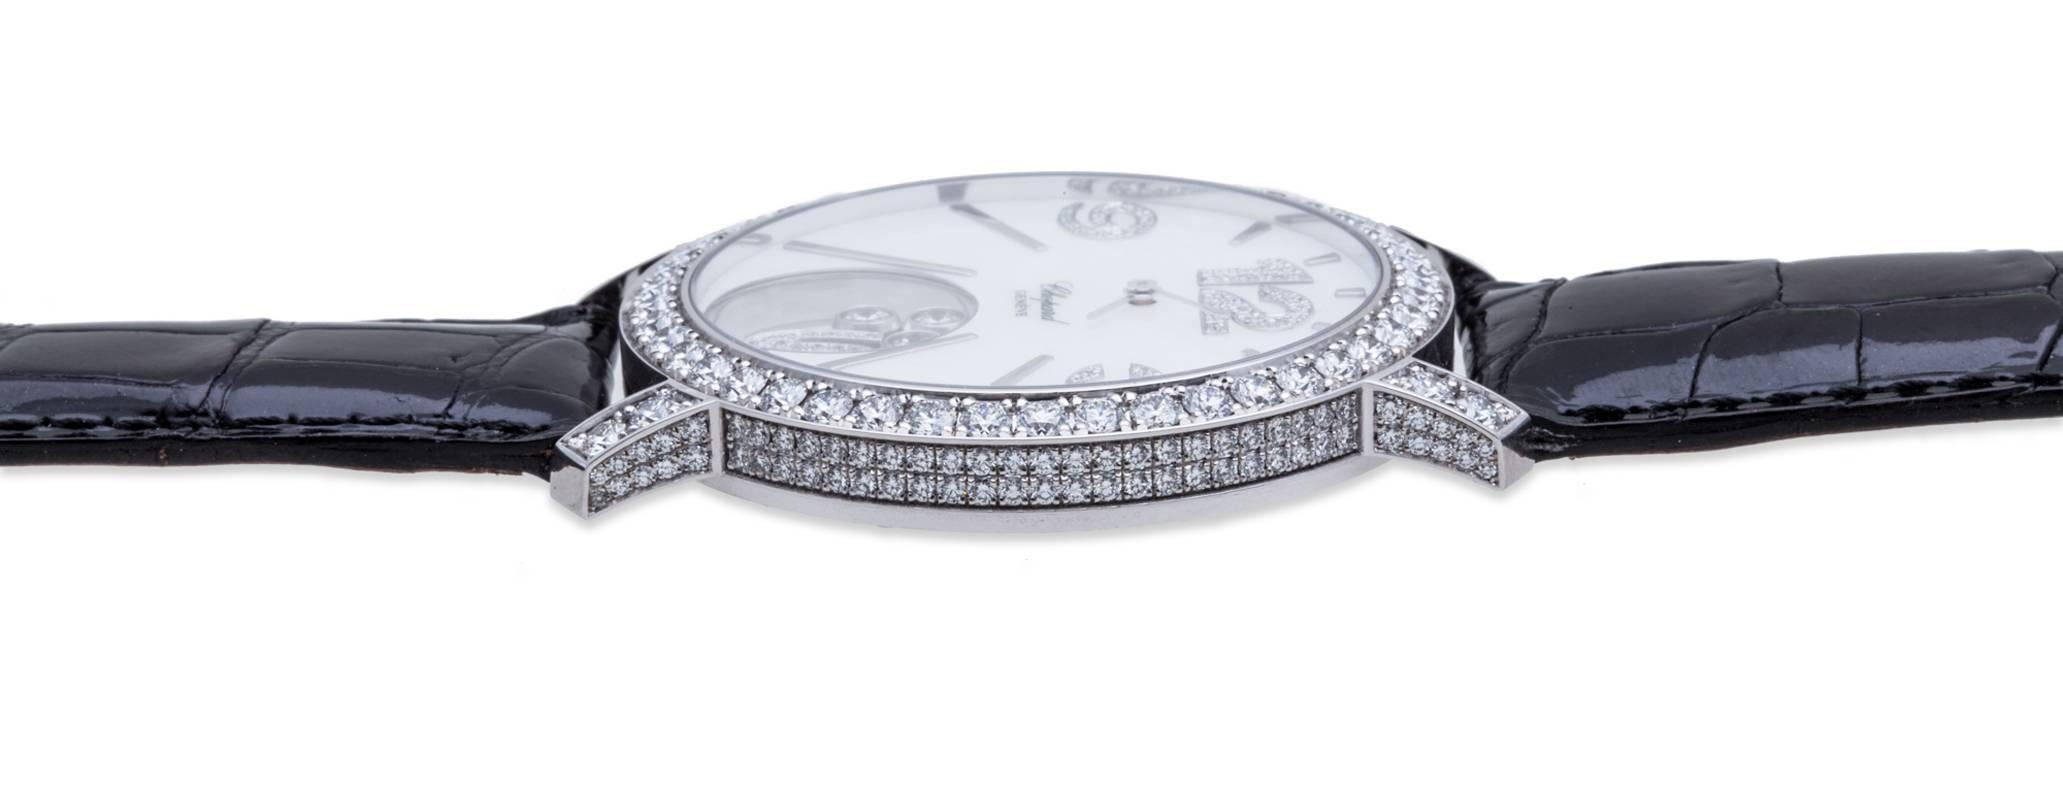 Chopard Happy Diamonds Ladies Quartz Diamond Watch in 18K White Gold, 40mm Full Diamond Case and Bezel, Total Diamond Weight: 3.90ct, White Mother of Pearl Dial with Gold Indexes and Diamond Arabic Numeral Markers at the 9, 12, & 3 o'clock